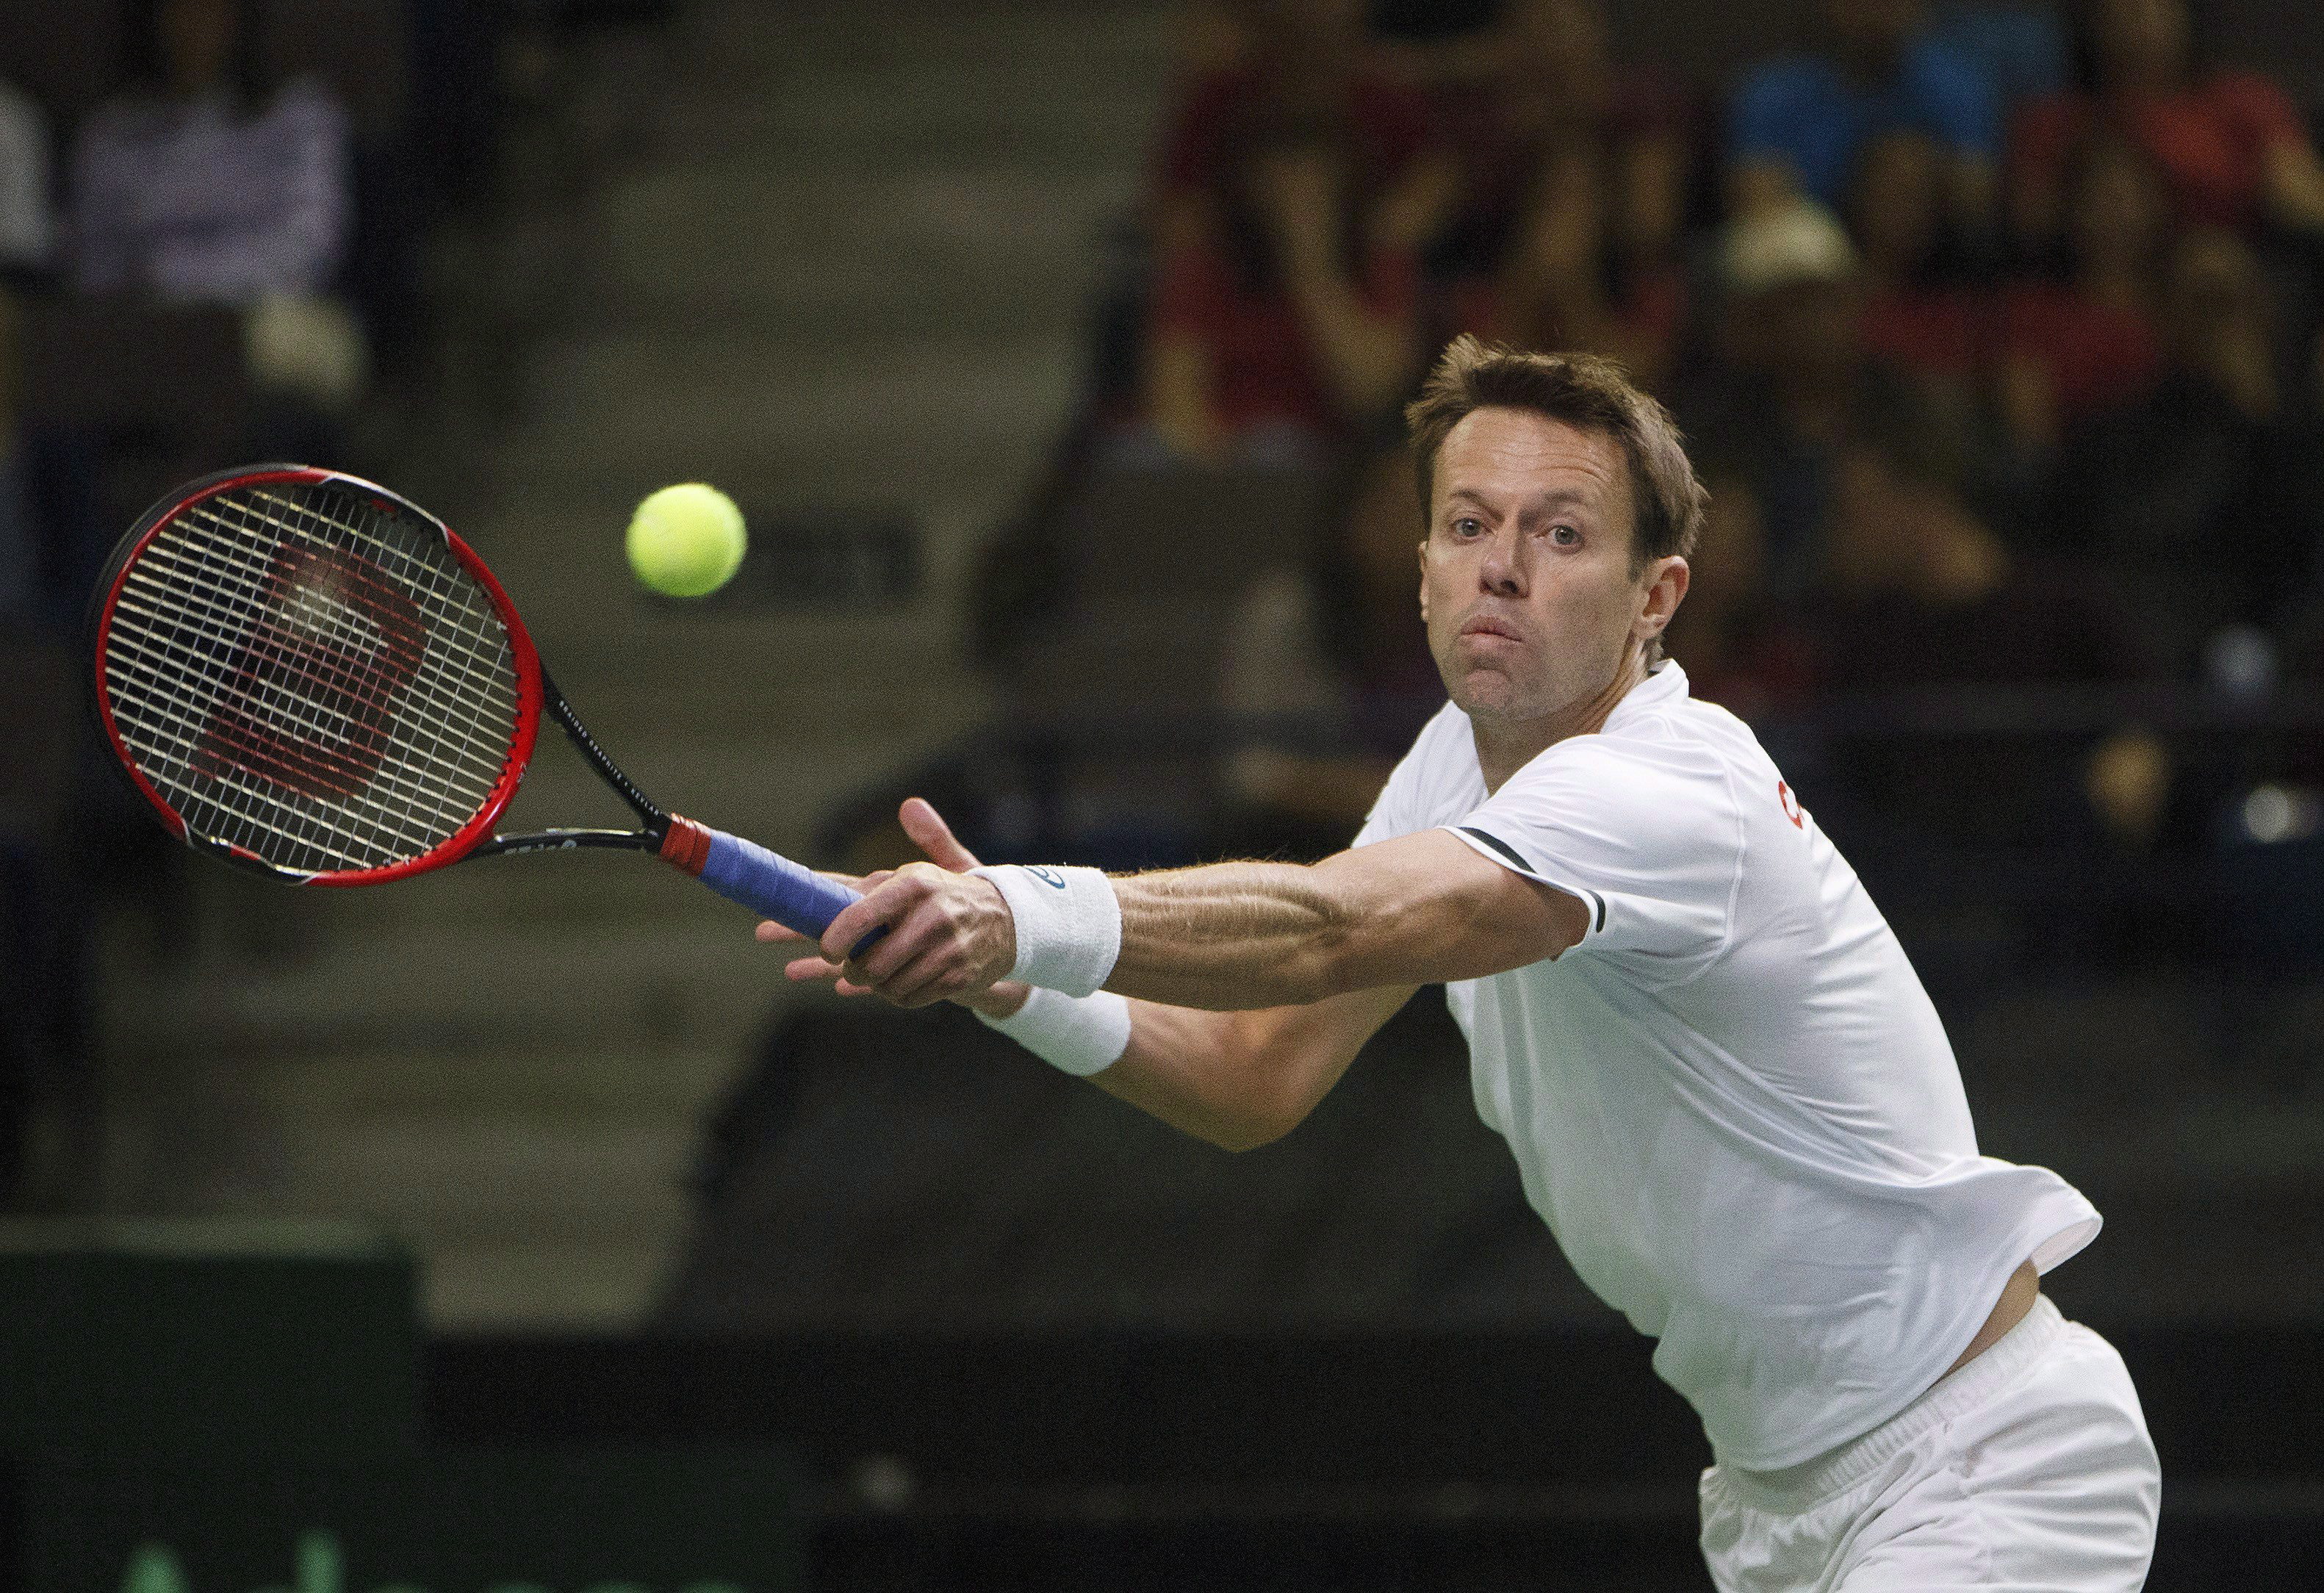 Daniel Nestor about to hit the ball